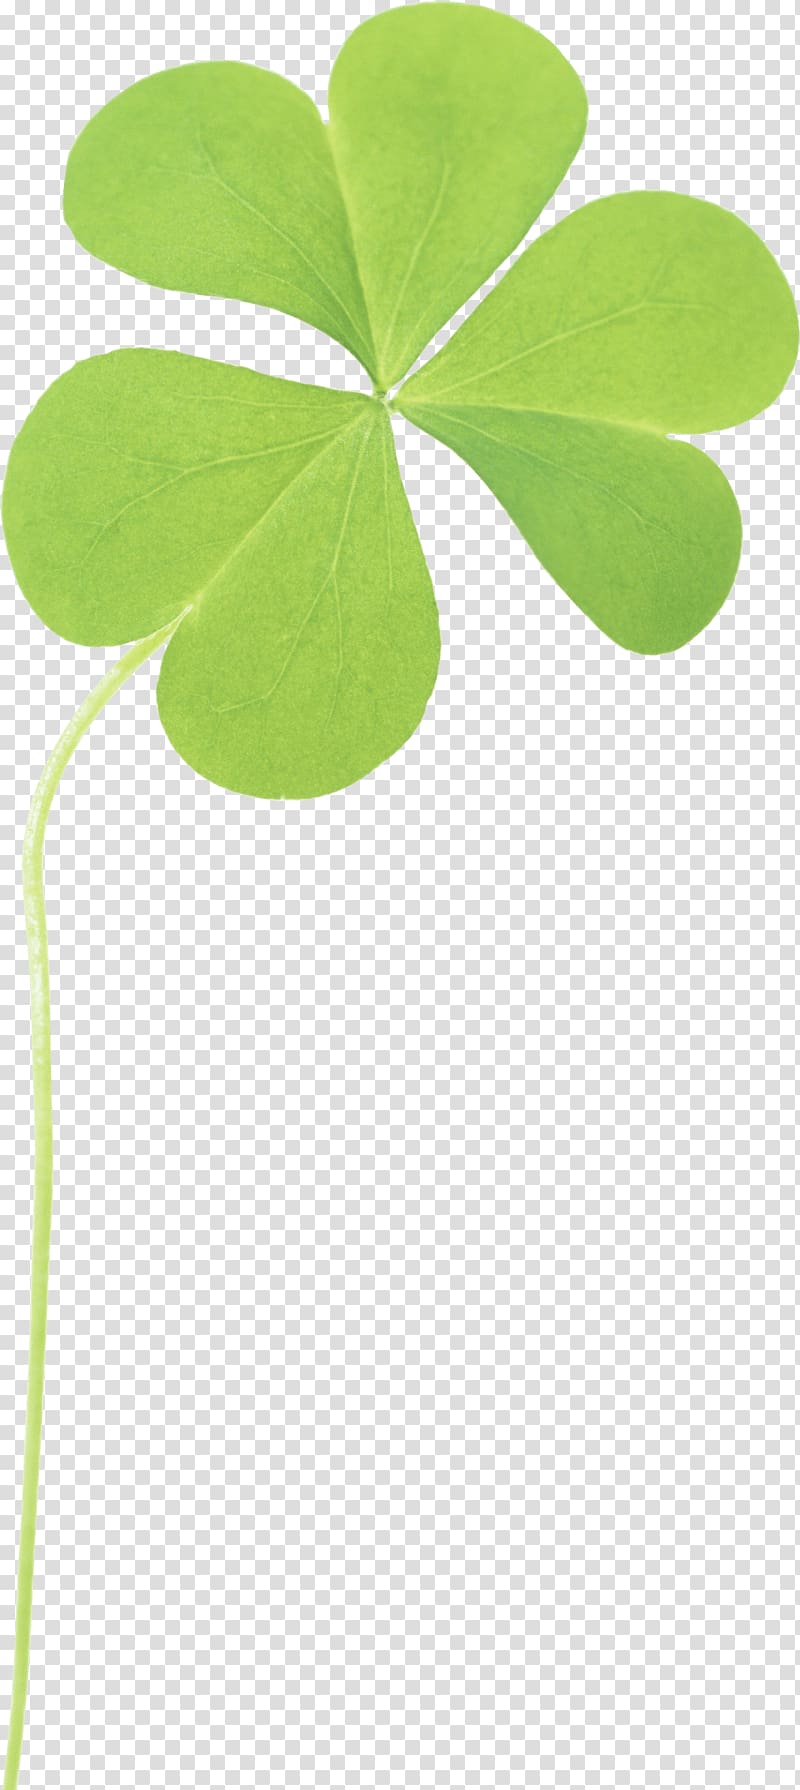 green leafed plant, Clover Three Light transparent background PNG clipart